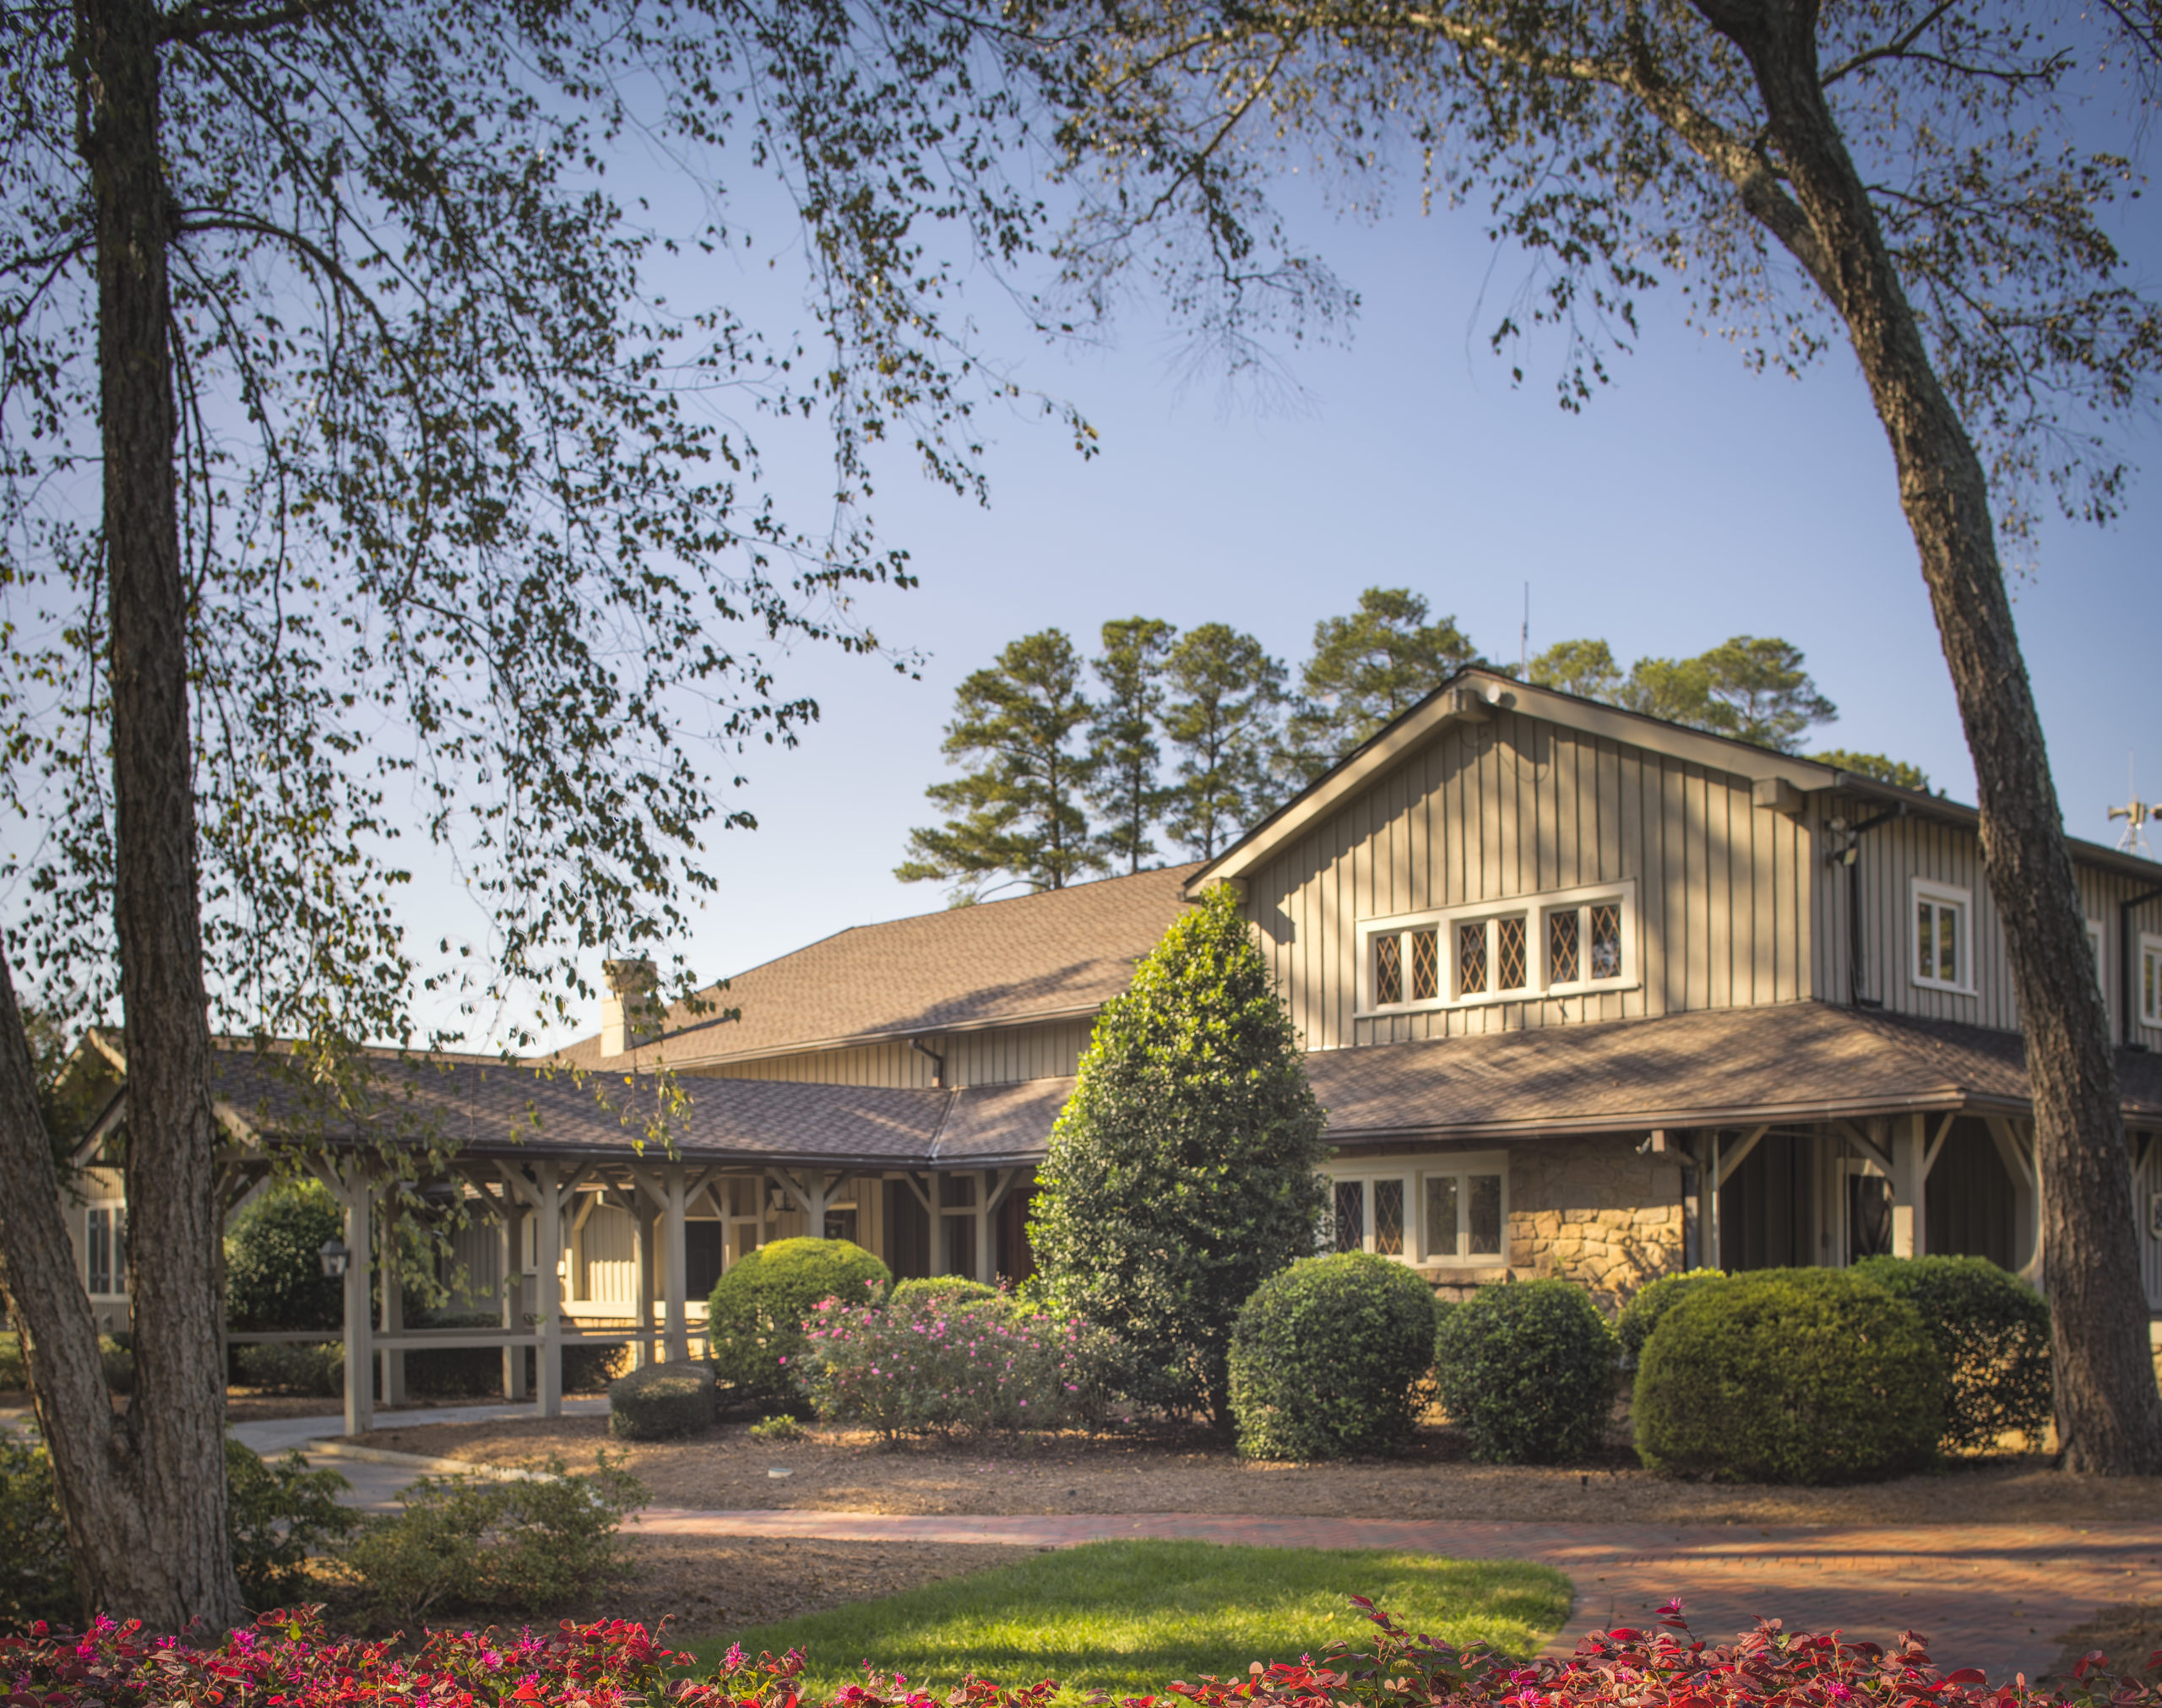 What Sets MacGregor Downs Country Club Apart from the Rest?